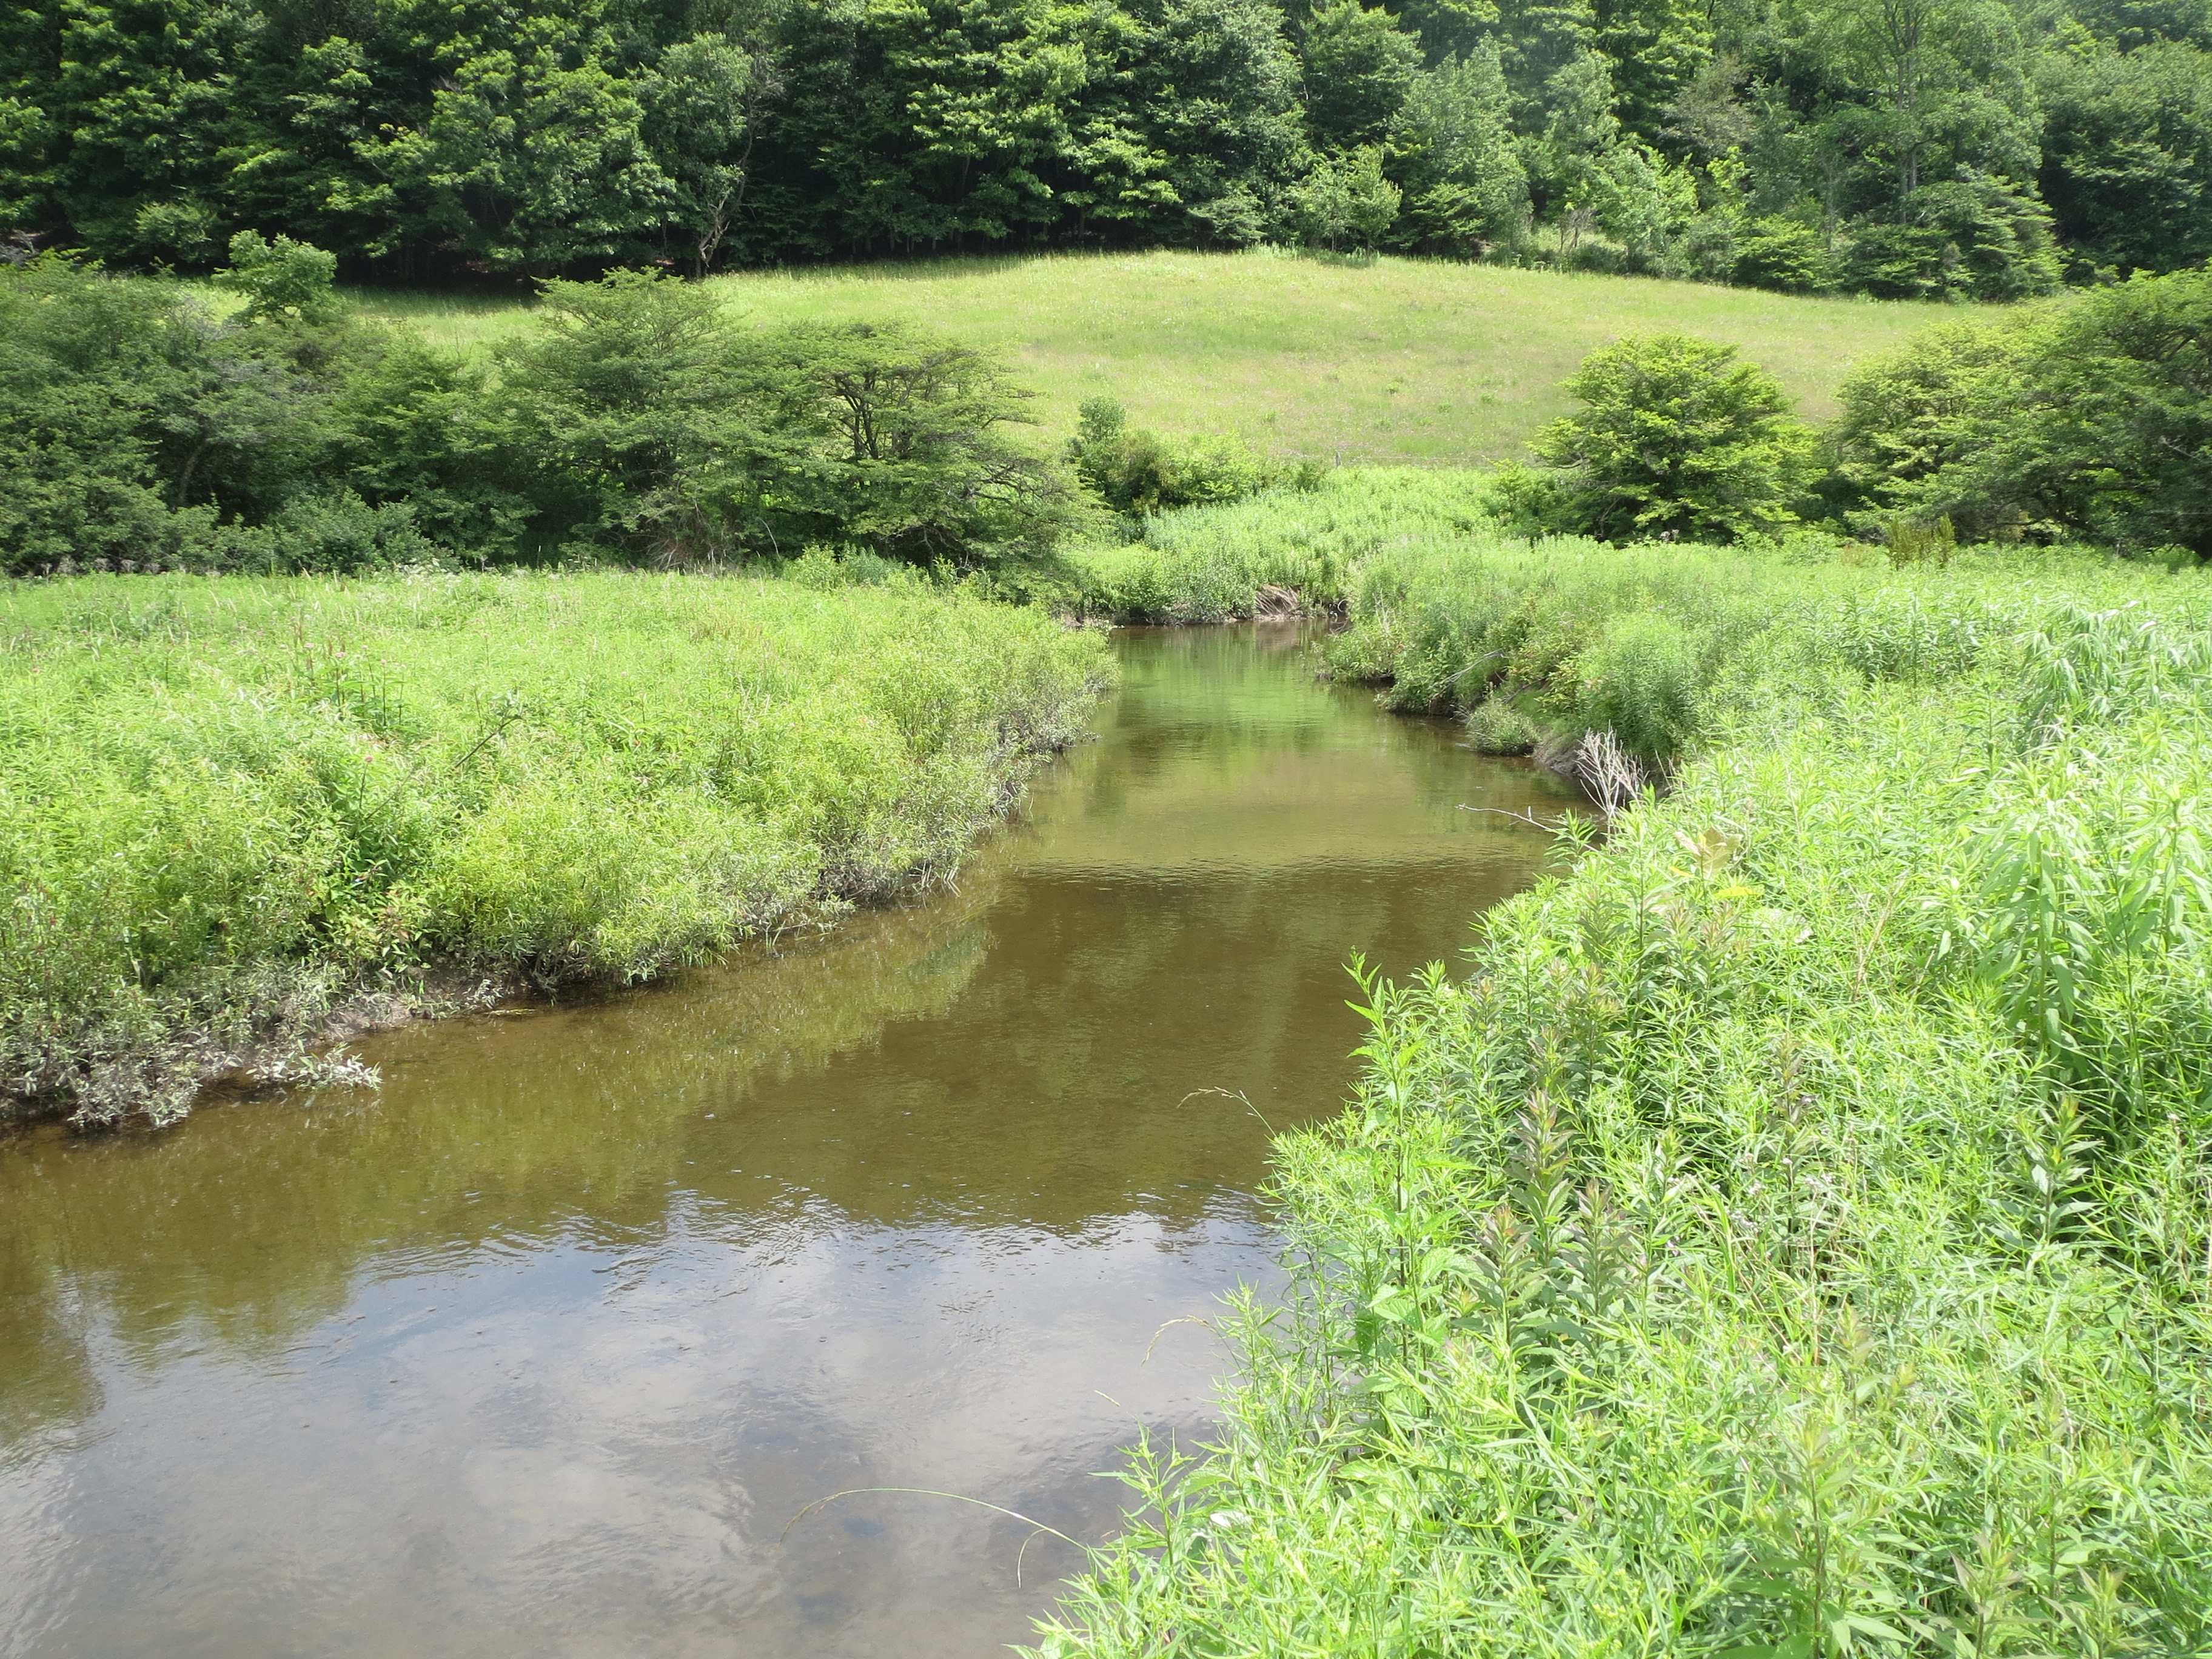 A stream in the Upper Susquehanna is bordered by shrubs and trees.